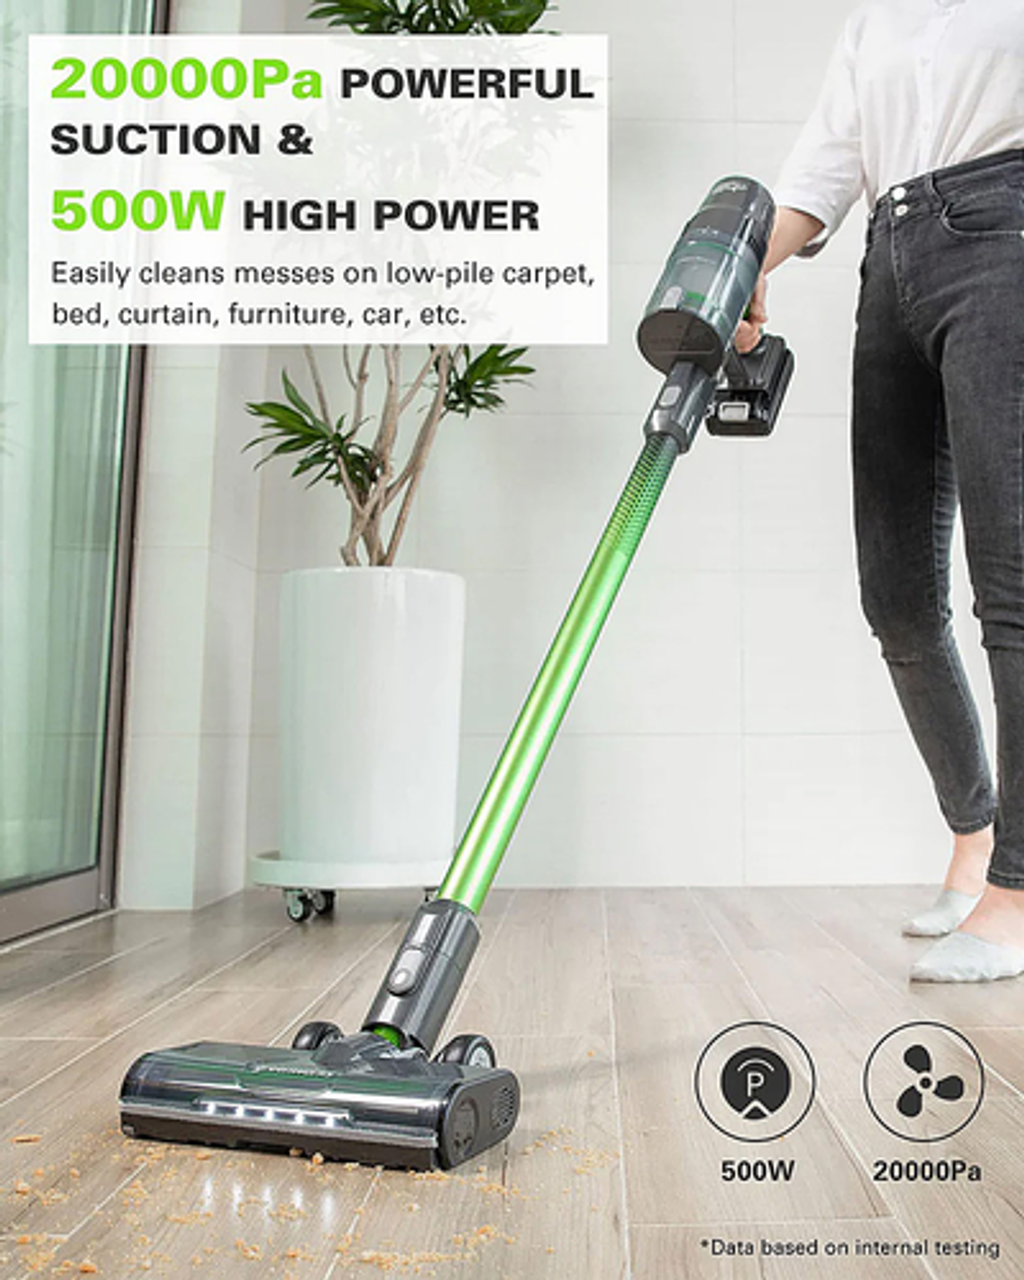 Greenworks - 24-Volt Stick Vacuum with 4ah Battery, Attachments, & Charger - Green